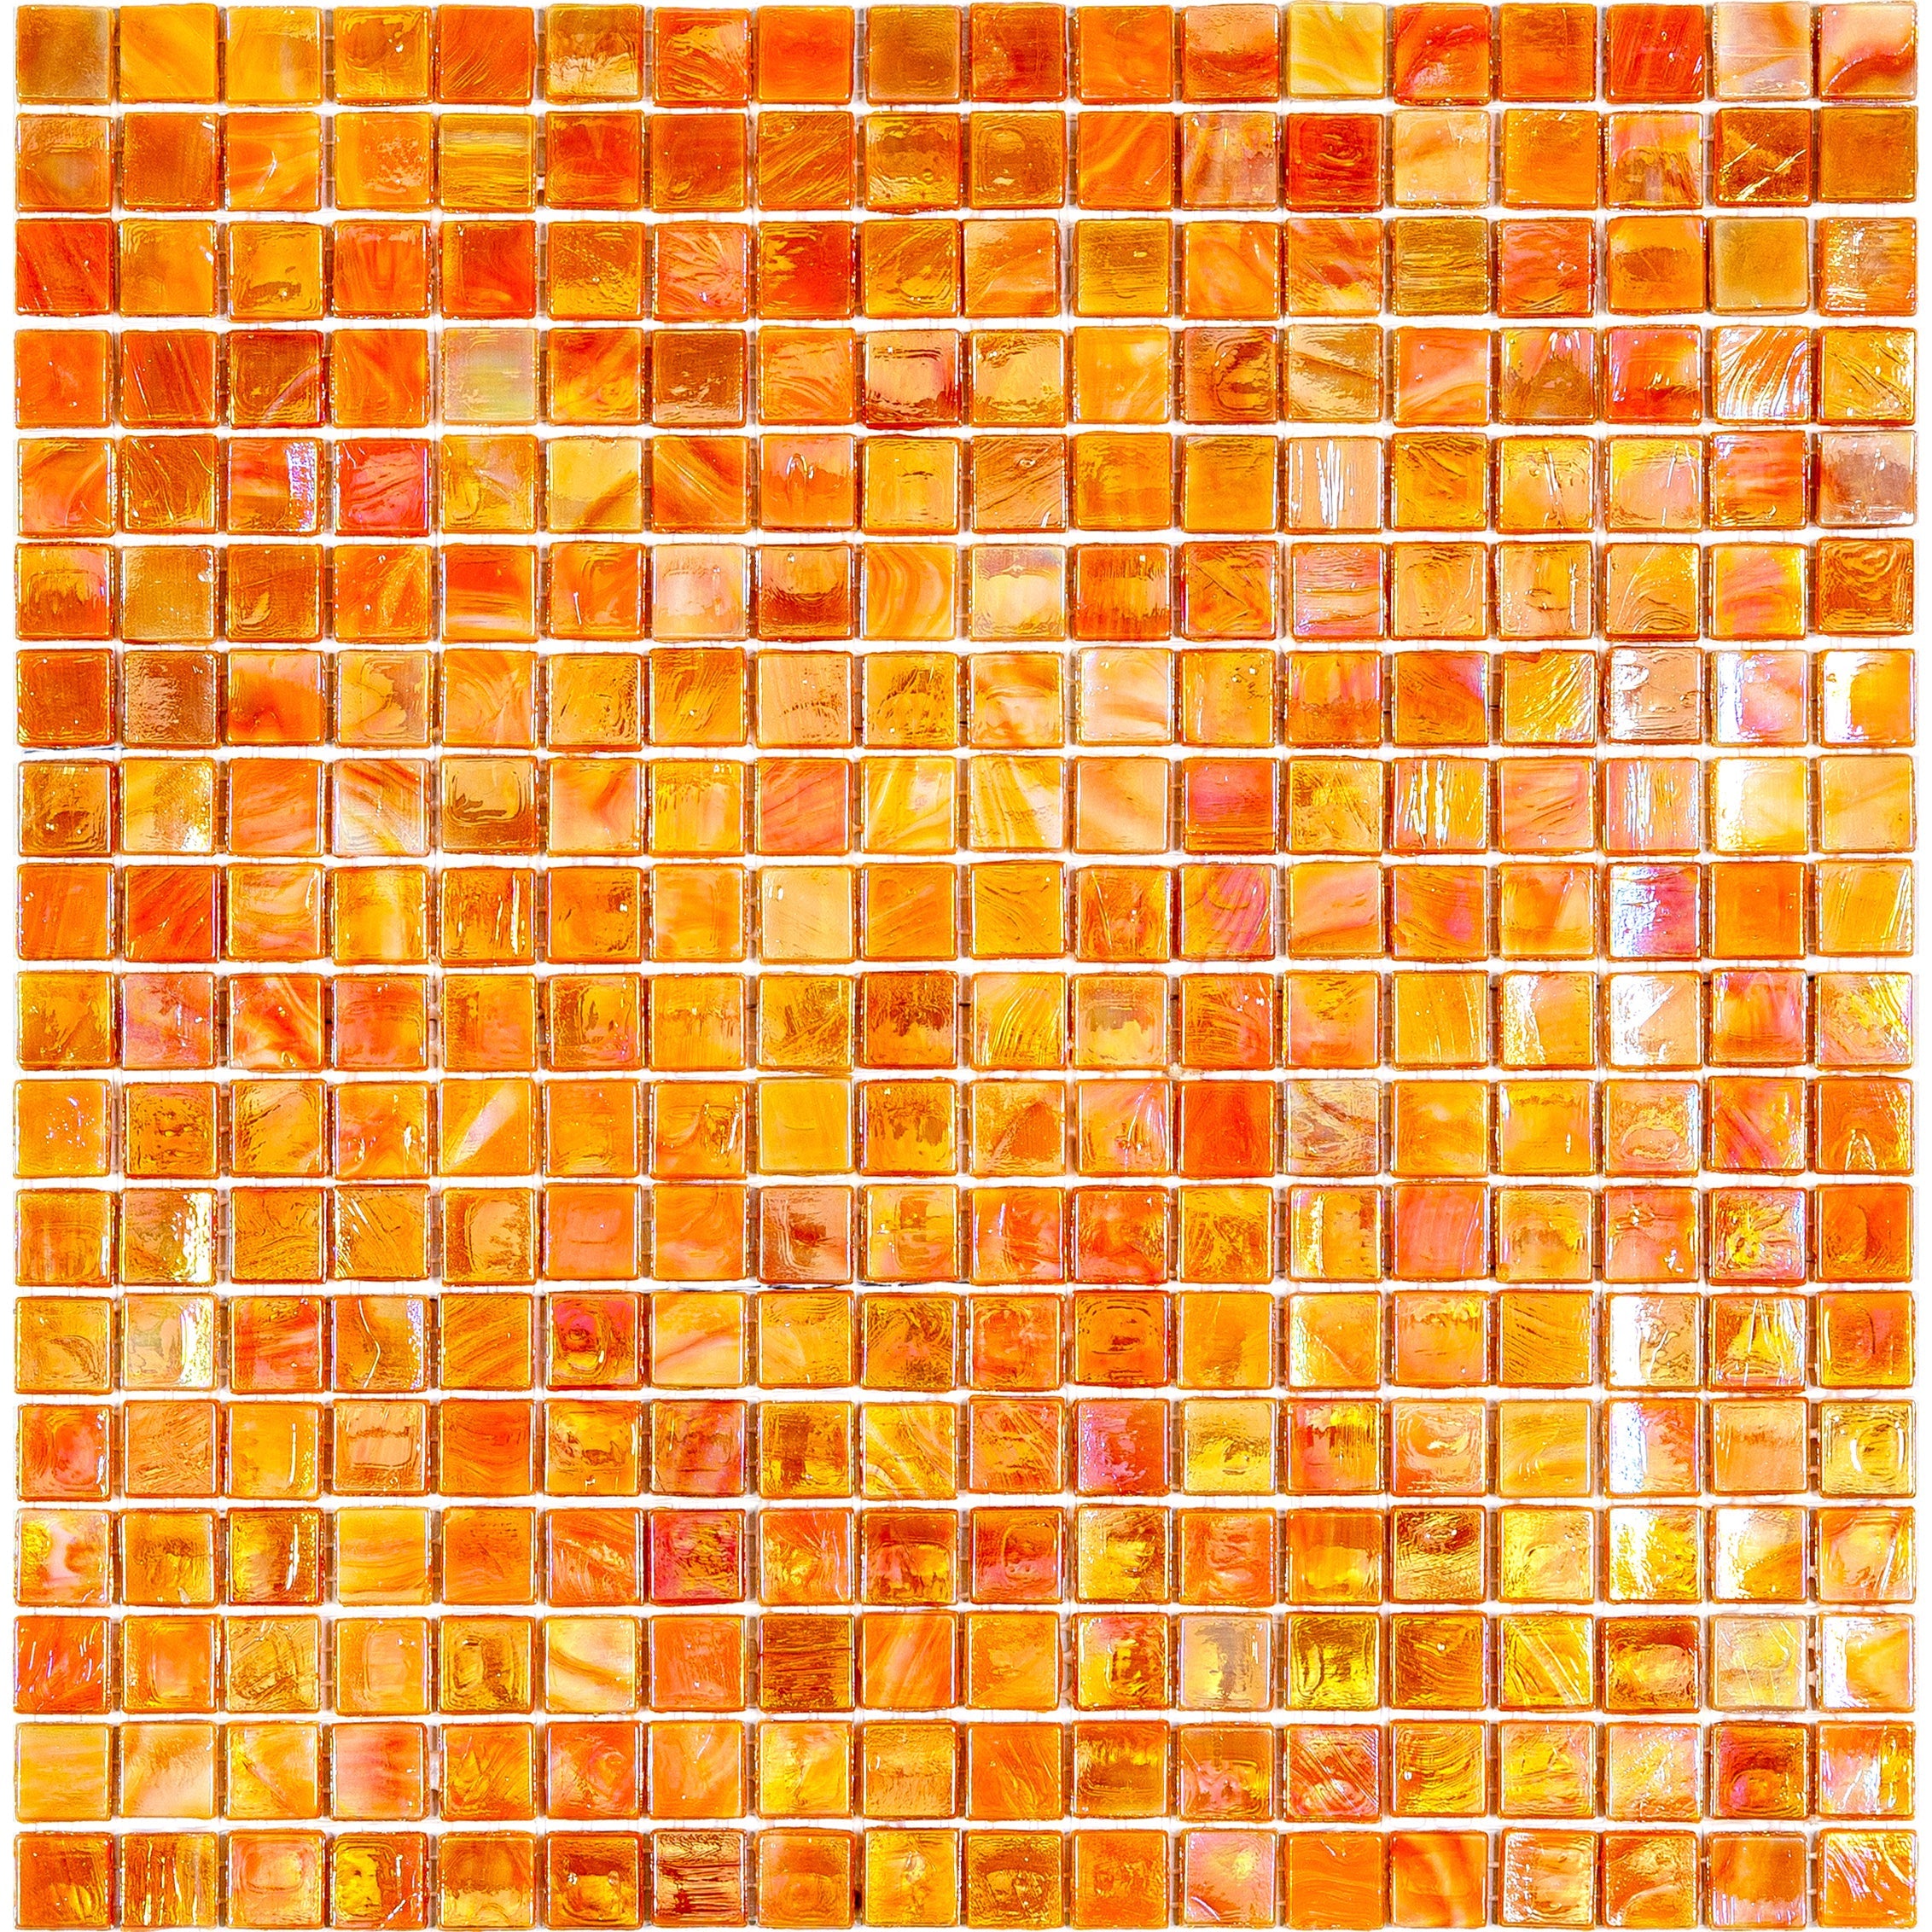 mir alma solid colors 0_6 inch nibble nb0821 wall and floor mosaic distributed by surface group natural materials